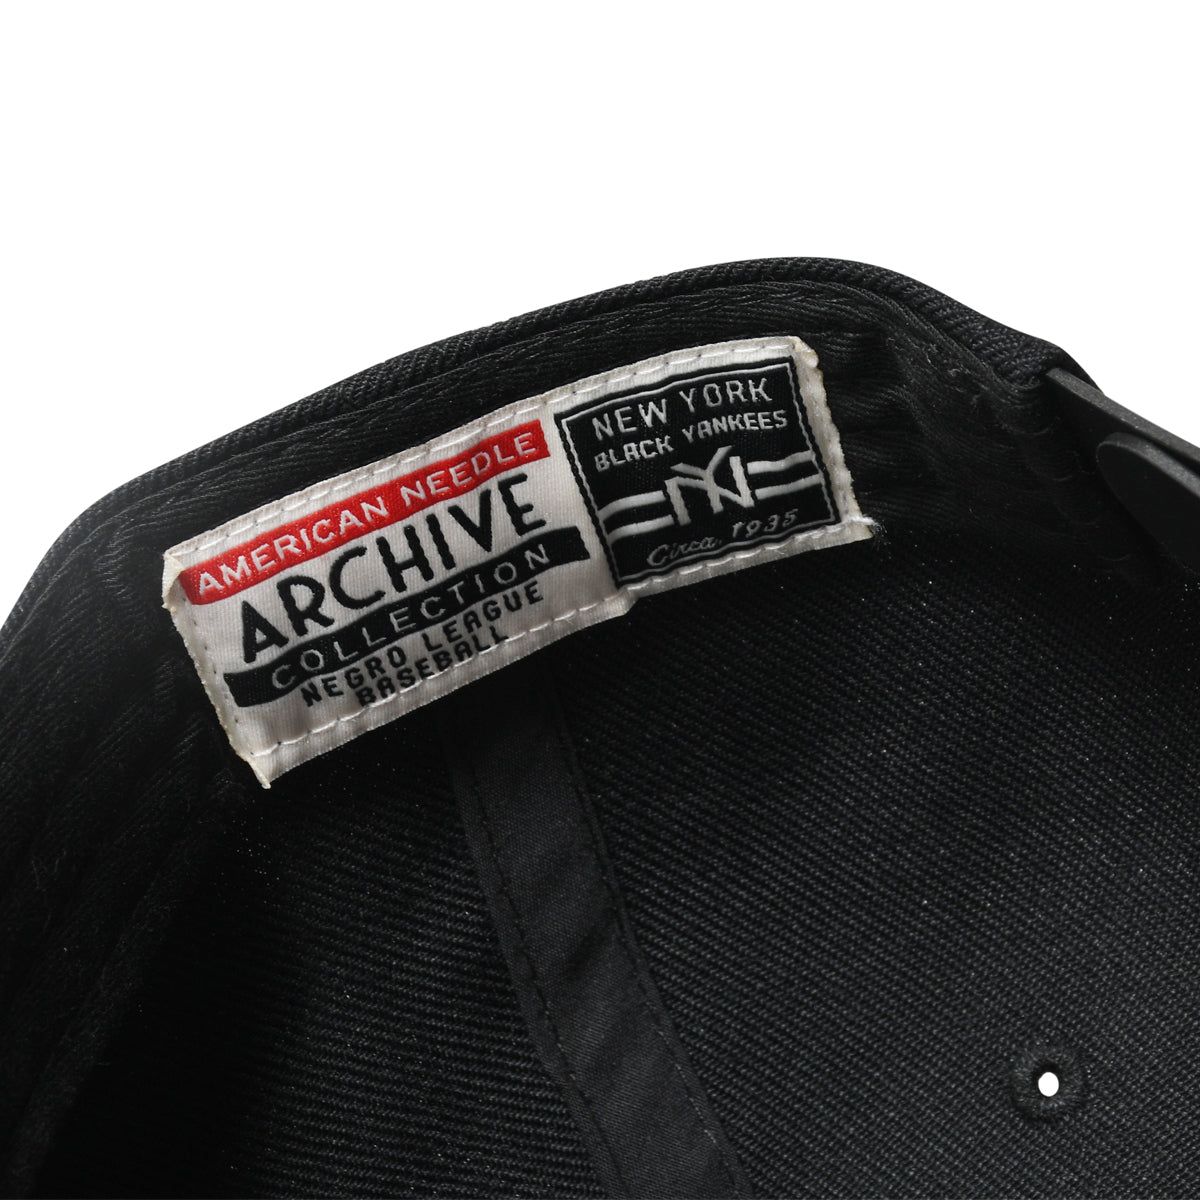 AMERICAN NEEDLE Archive 400 series - NY Black Yankees【21006ANBY】